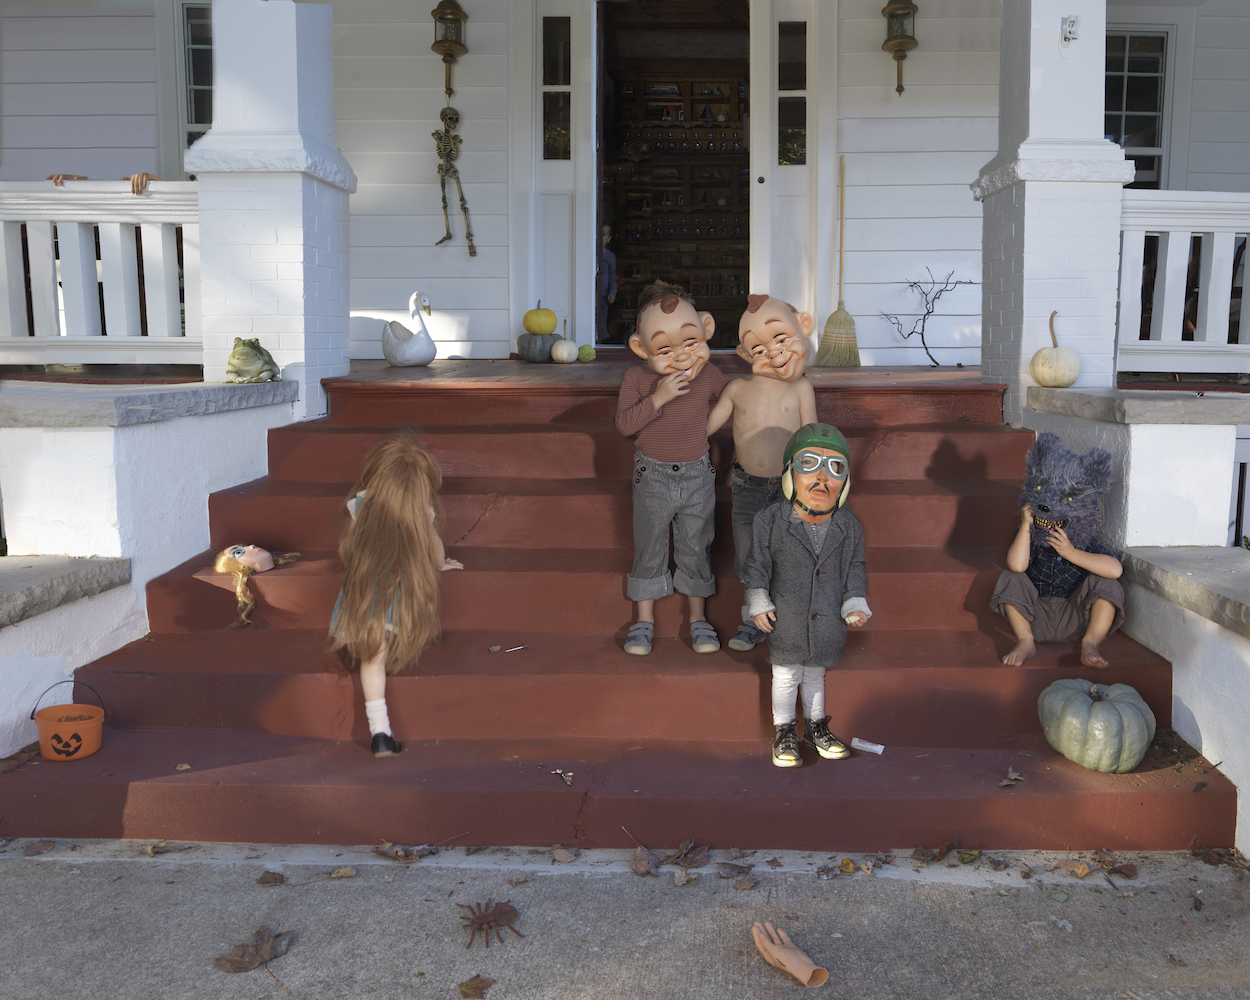 Julie Blackmon, Masks, 2021, archival pigment print, 26" x 31.5", 36" x 44", 44" x 54", editions of 7, price on request